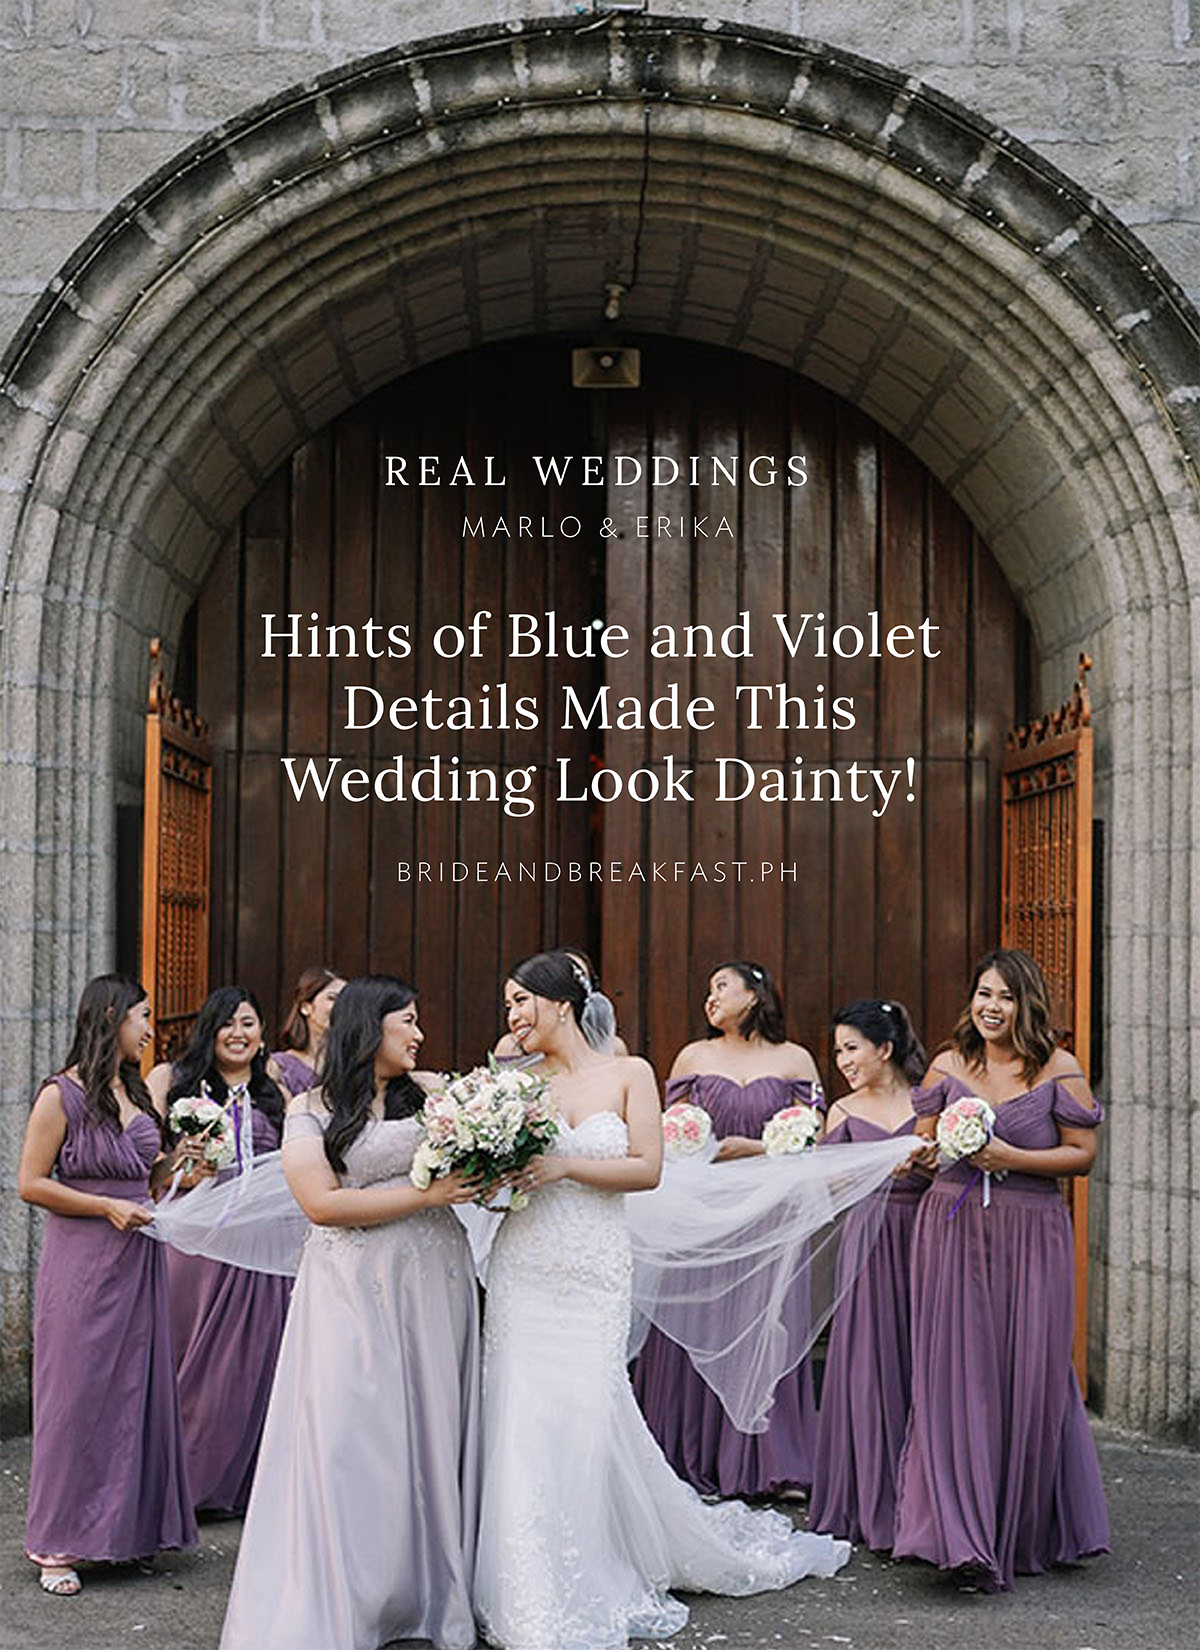 Hints of Blue and Violet Details Made This Wedding Look Dainty!